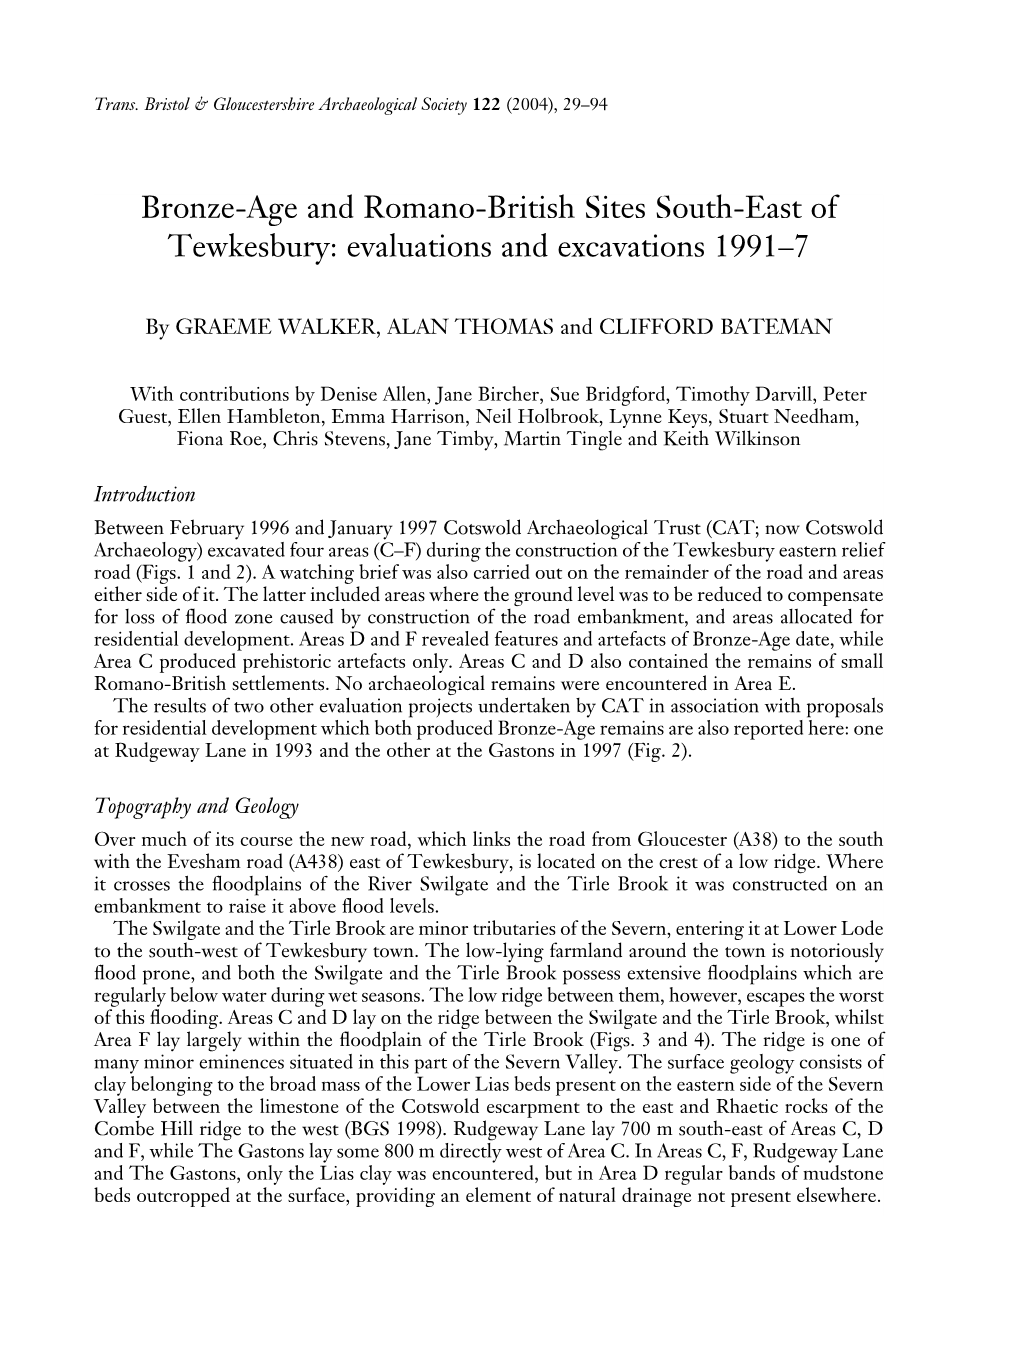 Bronze-Age and Romano-British Sites South-East of Tewkesbury: Evaluations and Excavations 1991–7